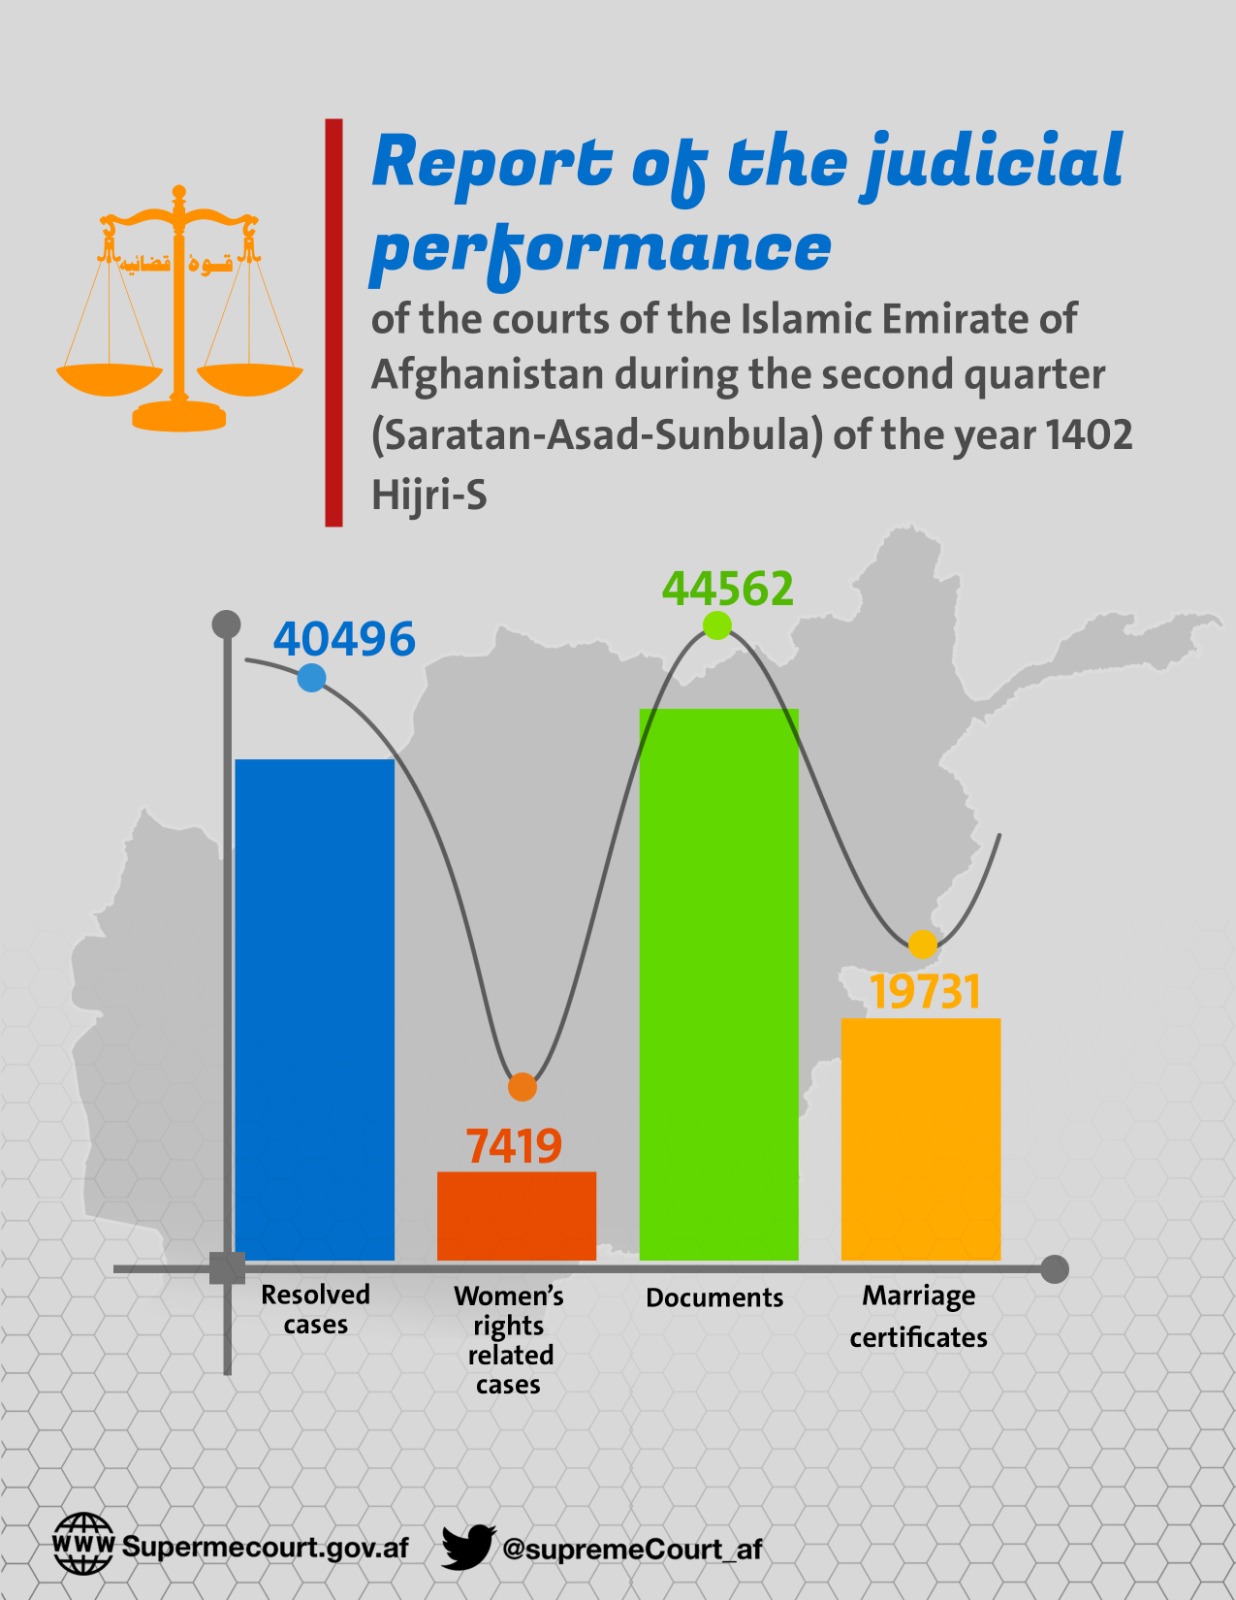 During the course of 1402 hijri-S, courts of Islamic Emirate of Afghanistan in second quarter (Saratan-Asad-and Sunbula) resolved (40496) different cases which included (7419) women’s rights related cases as well And the triple zone courts in this period have solved (44562) documents which included (19731) marriage certificates as well.